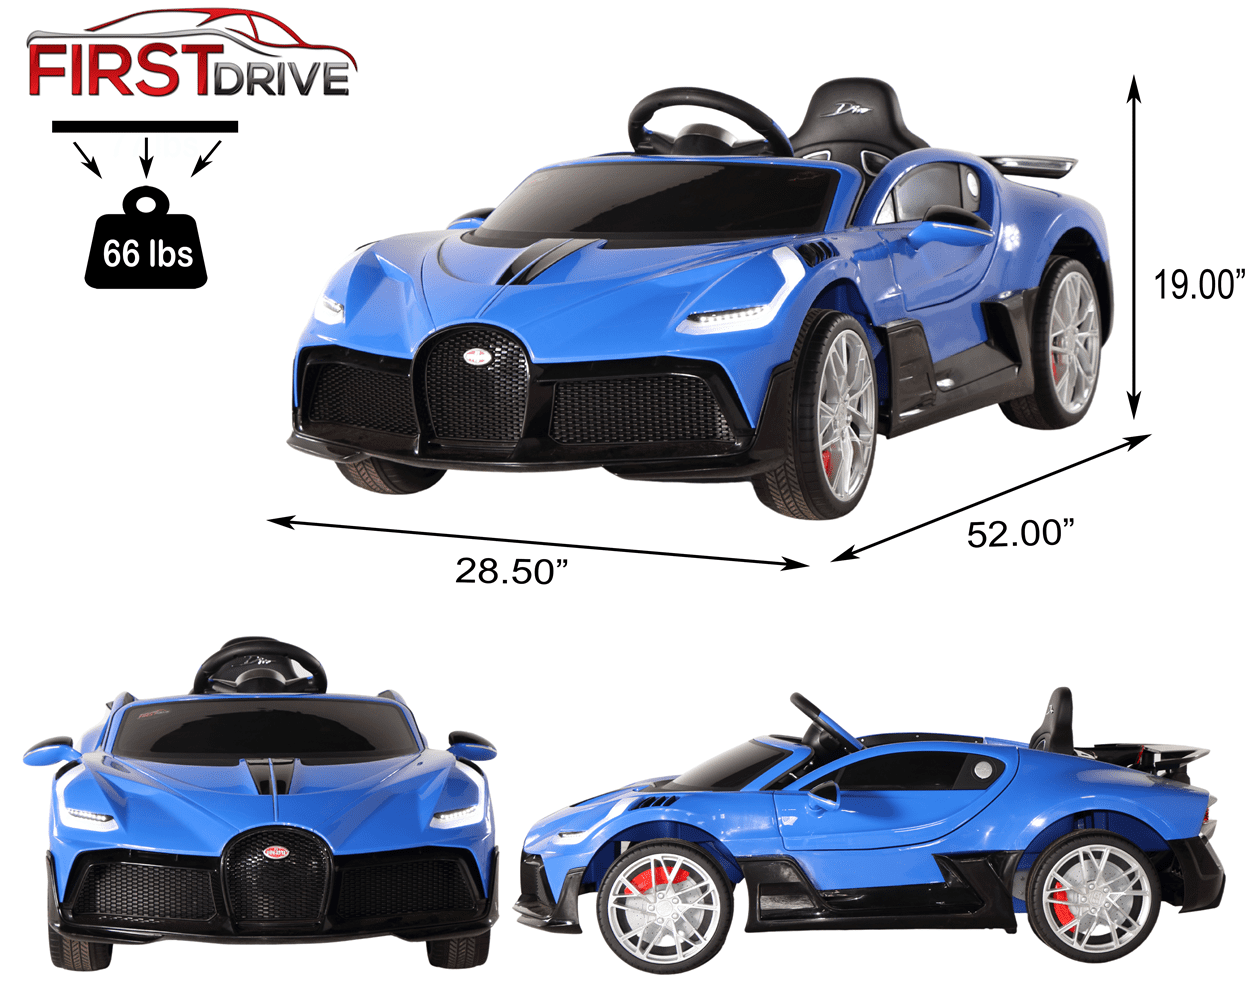 Wheels- MP3, and Bugatti Power Headlights, W/ Led Ride Bluetooth, Premium First - Drive Electric by Blue- Divo Parental Dual Cord, Car Remote, Motor On Aux